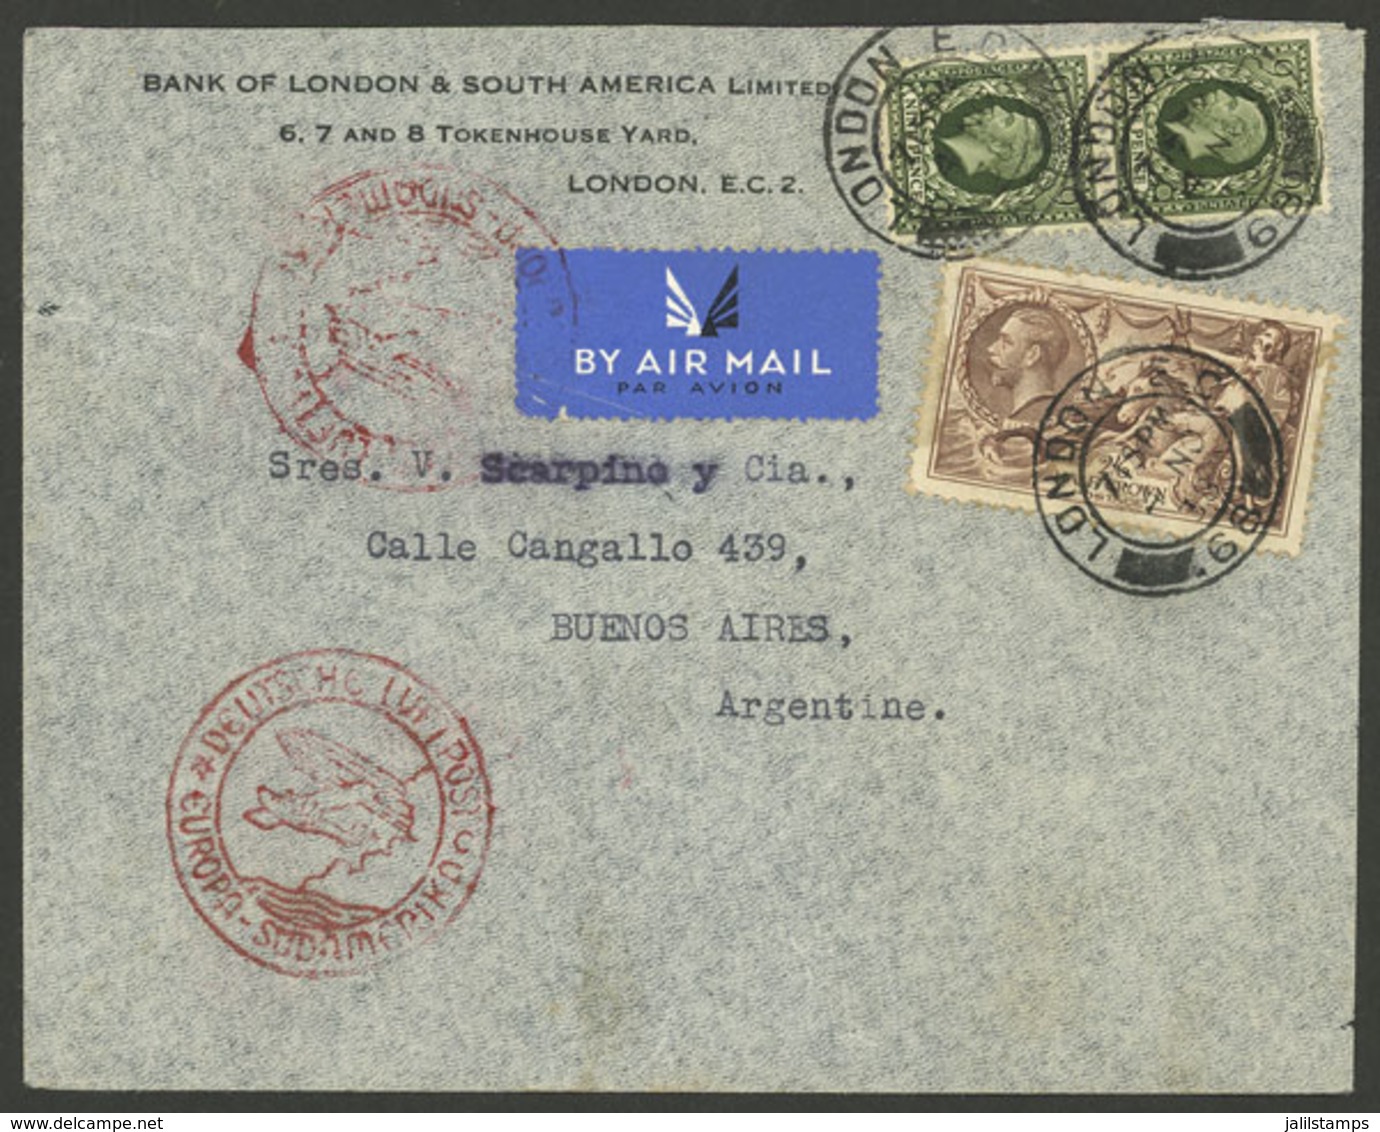 GREAT BRITAIN: 4/NO/1938 London - Argentina, Airmail Cover Sent By German DLH, Very Nice! - Brieven En Documenten